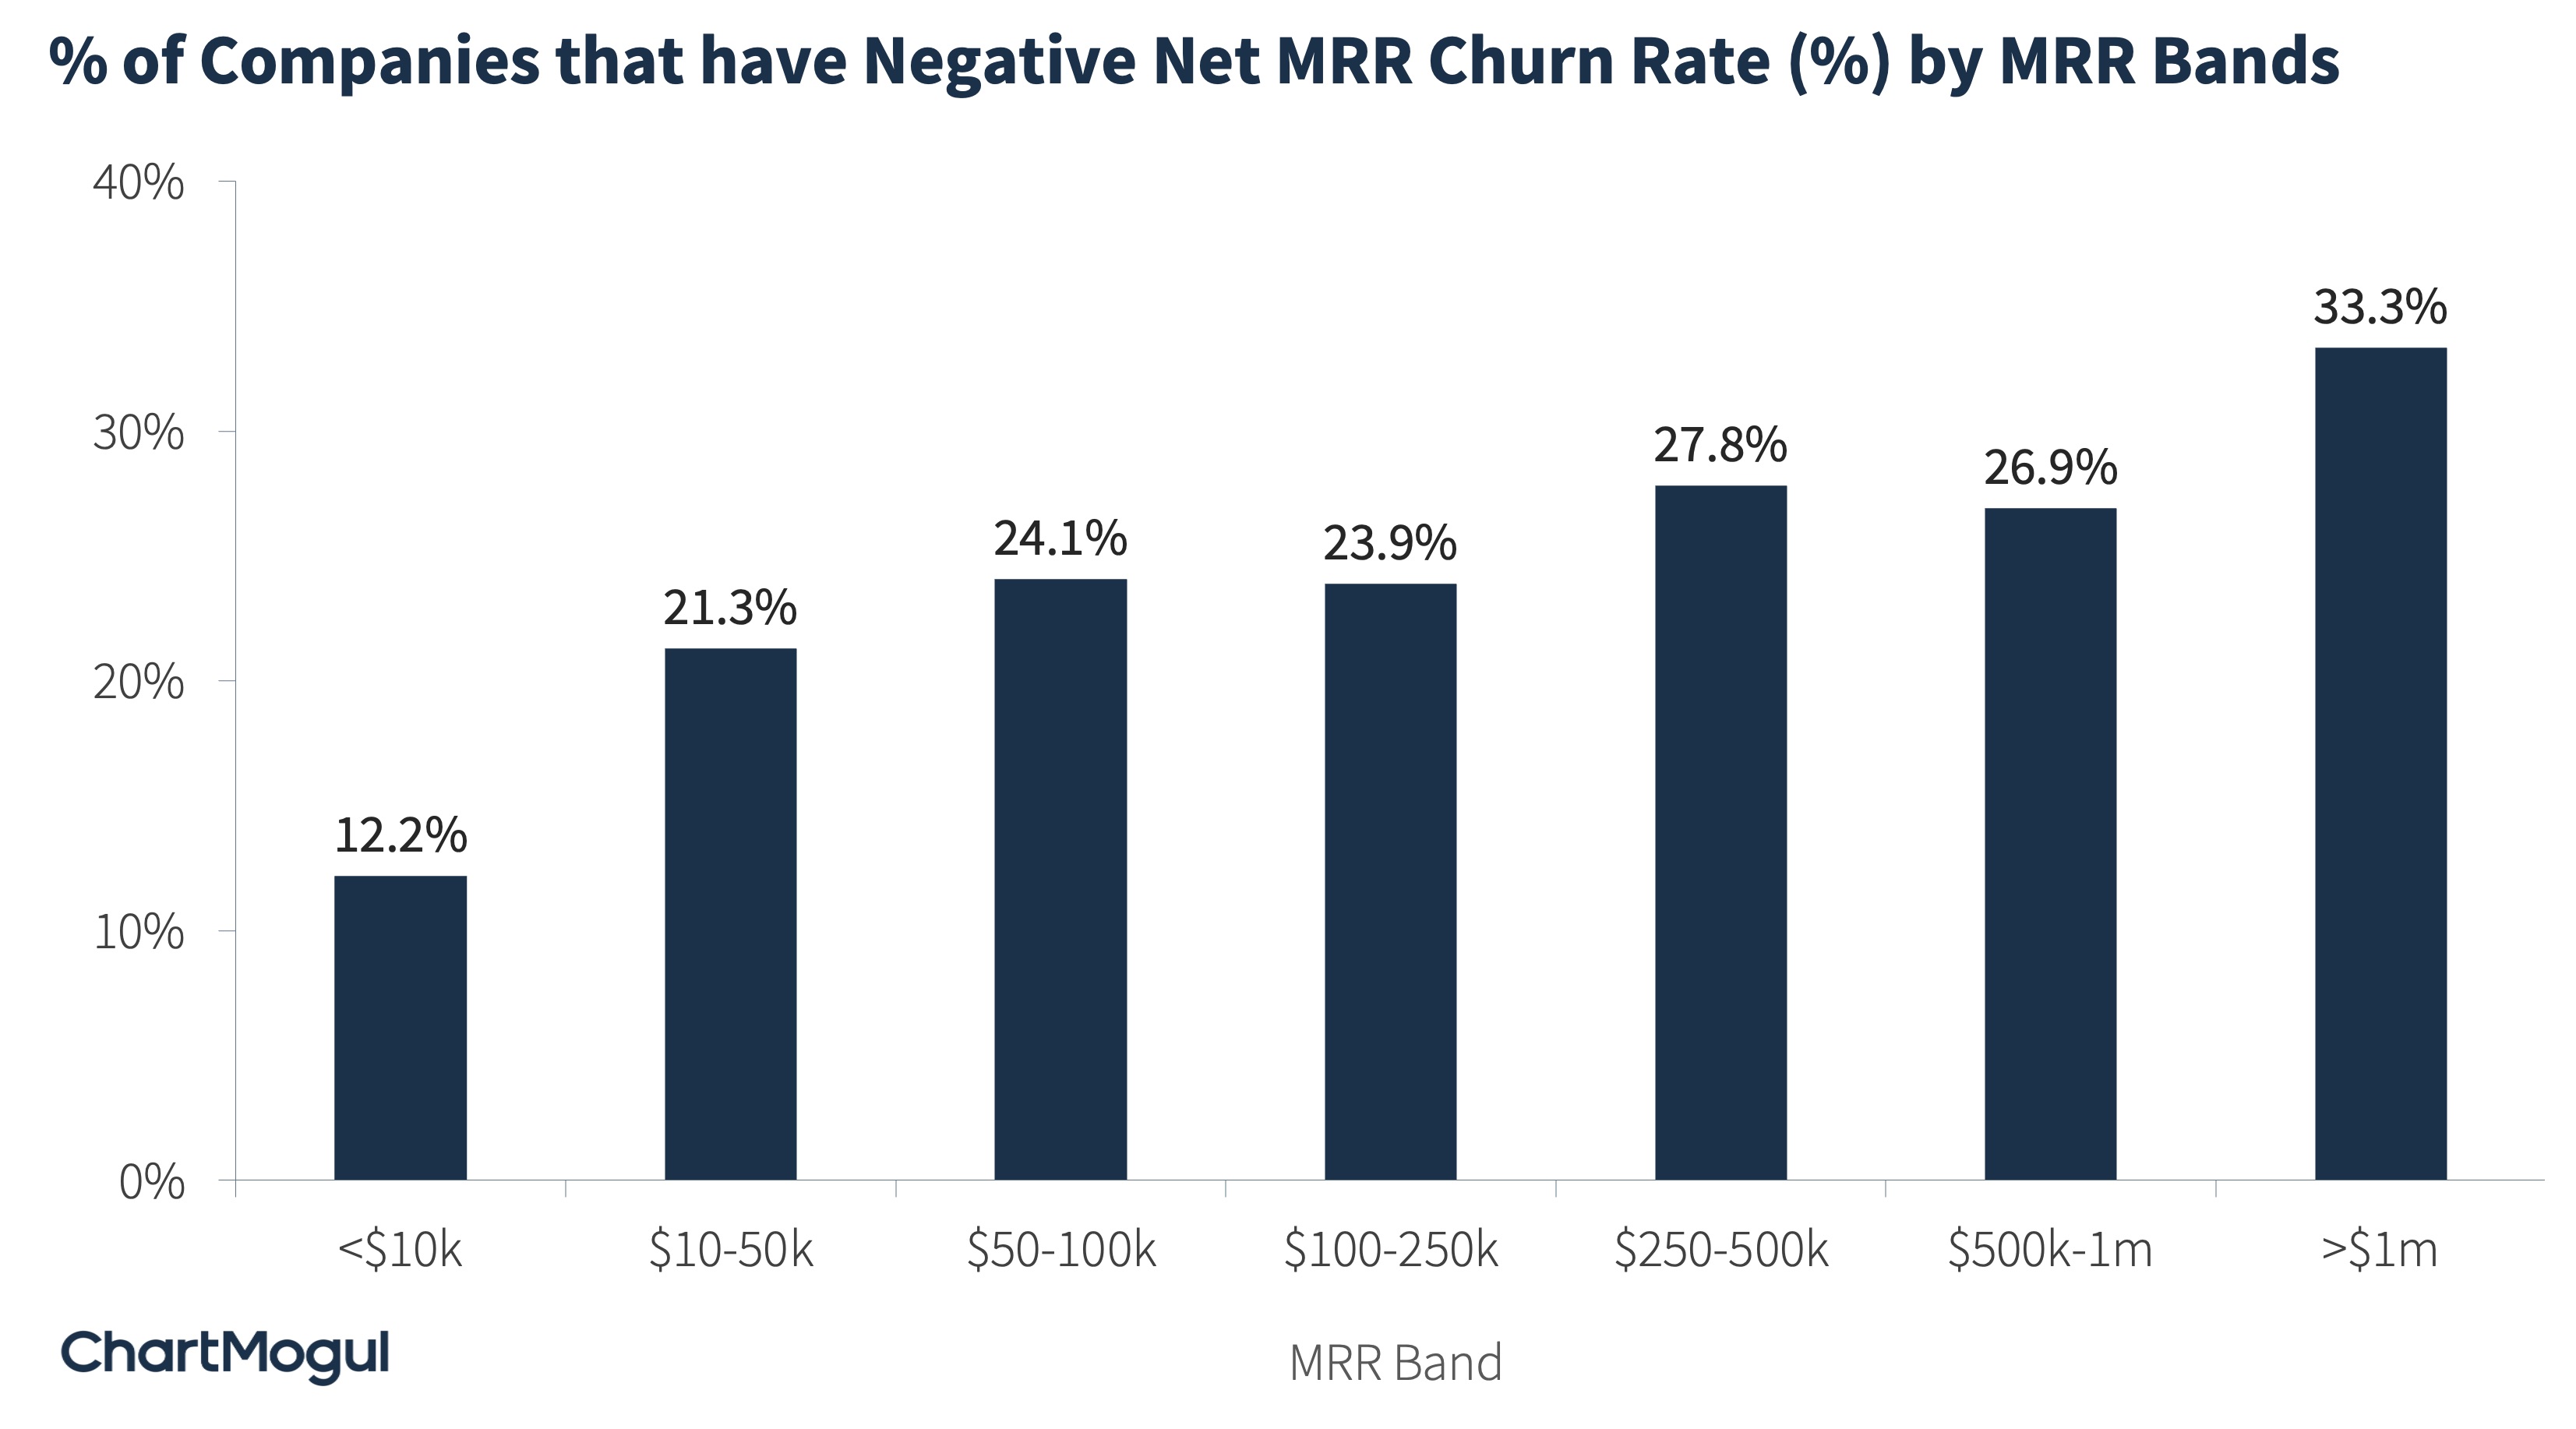 Percentage of companies that have negative net MRR churn